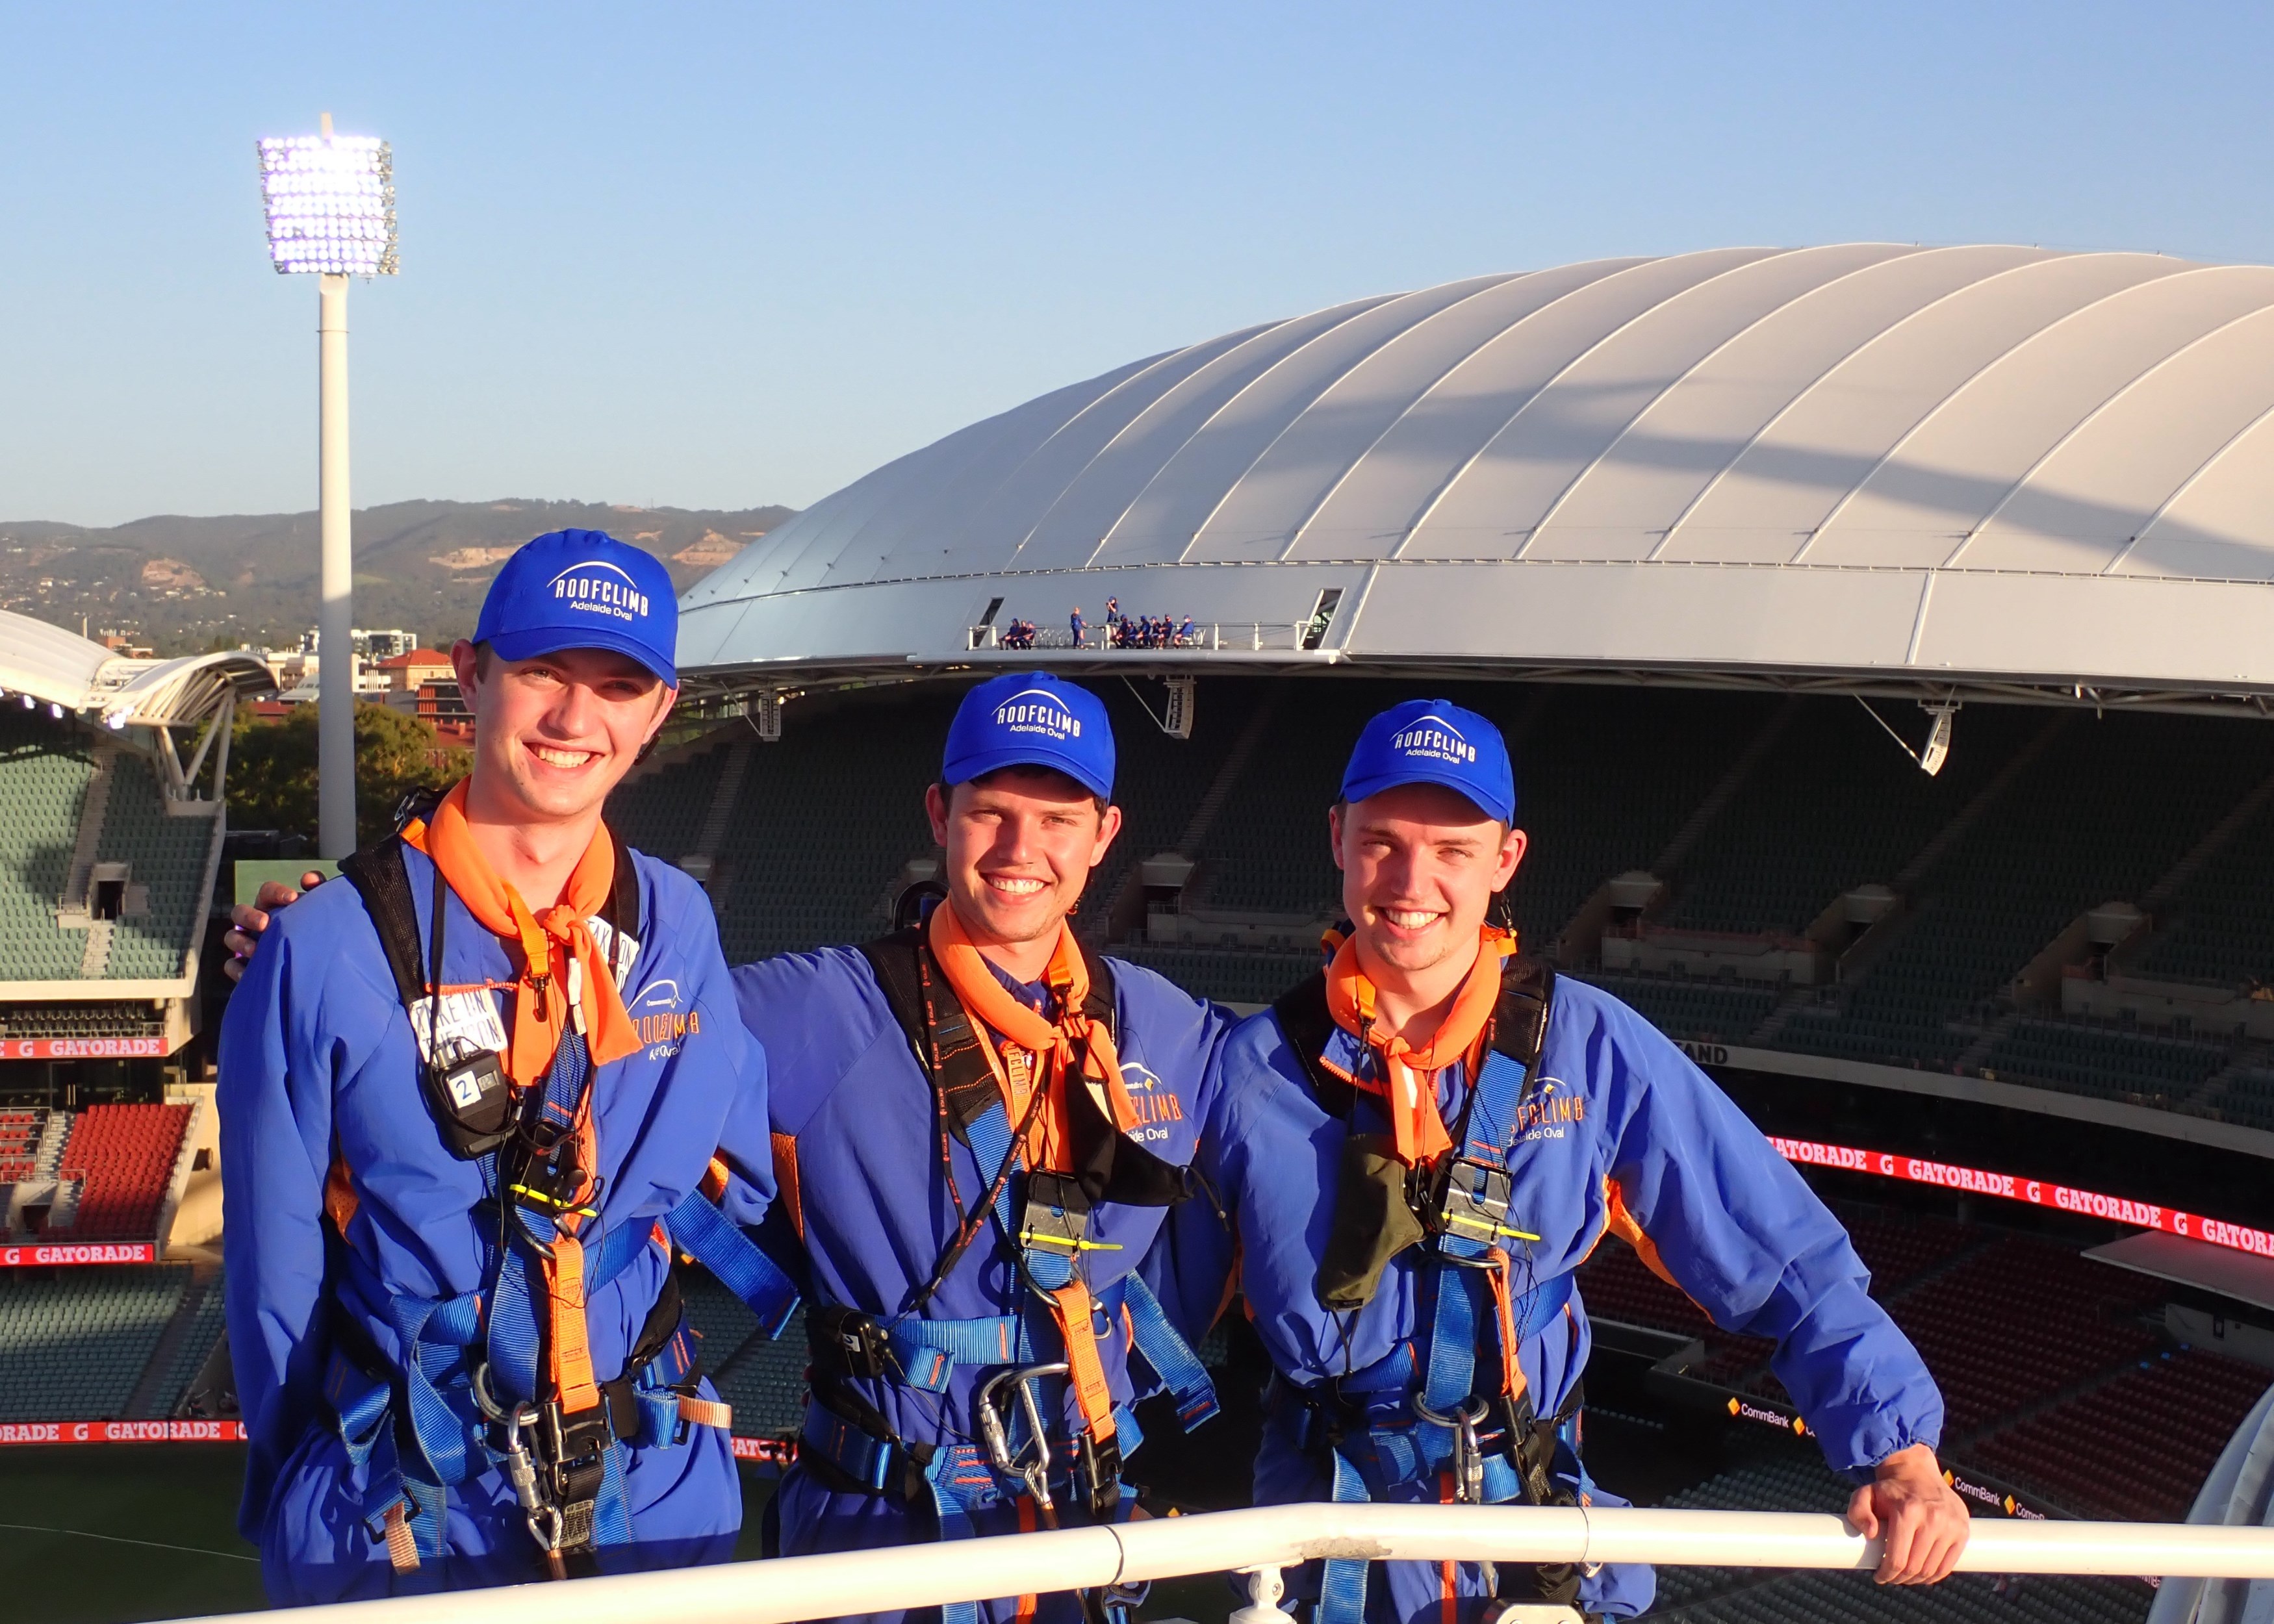 Adelaide Oval Roofclimb with my brothers